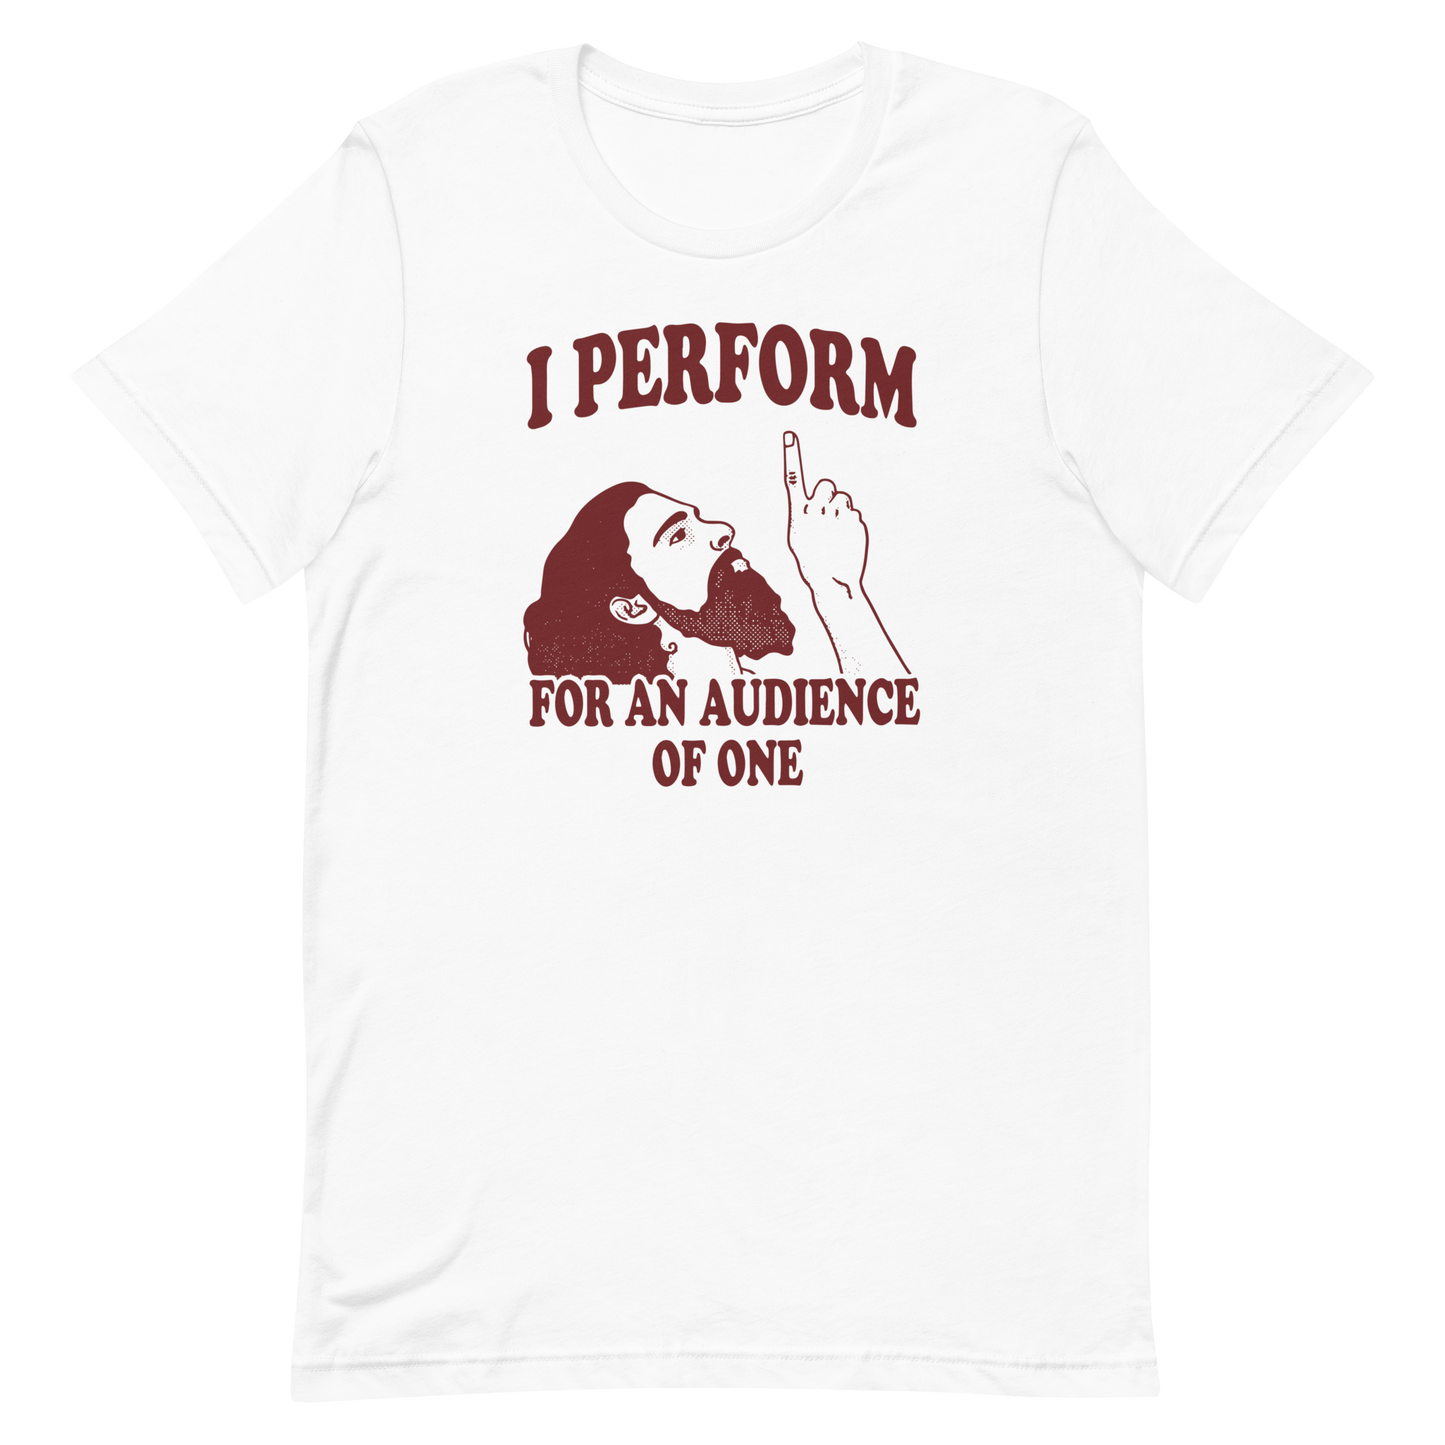 I Perform For An Audience of One T-shirt